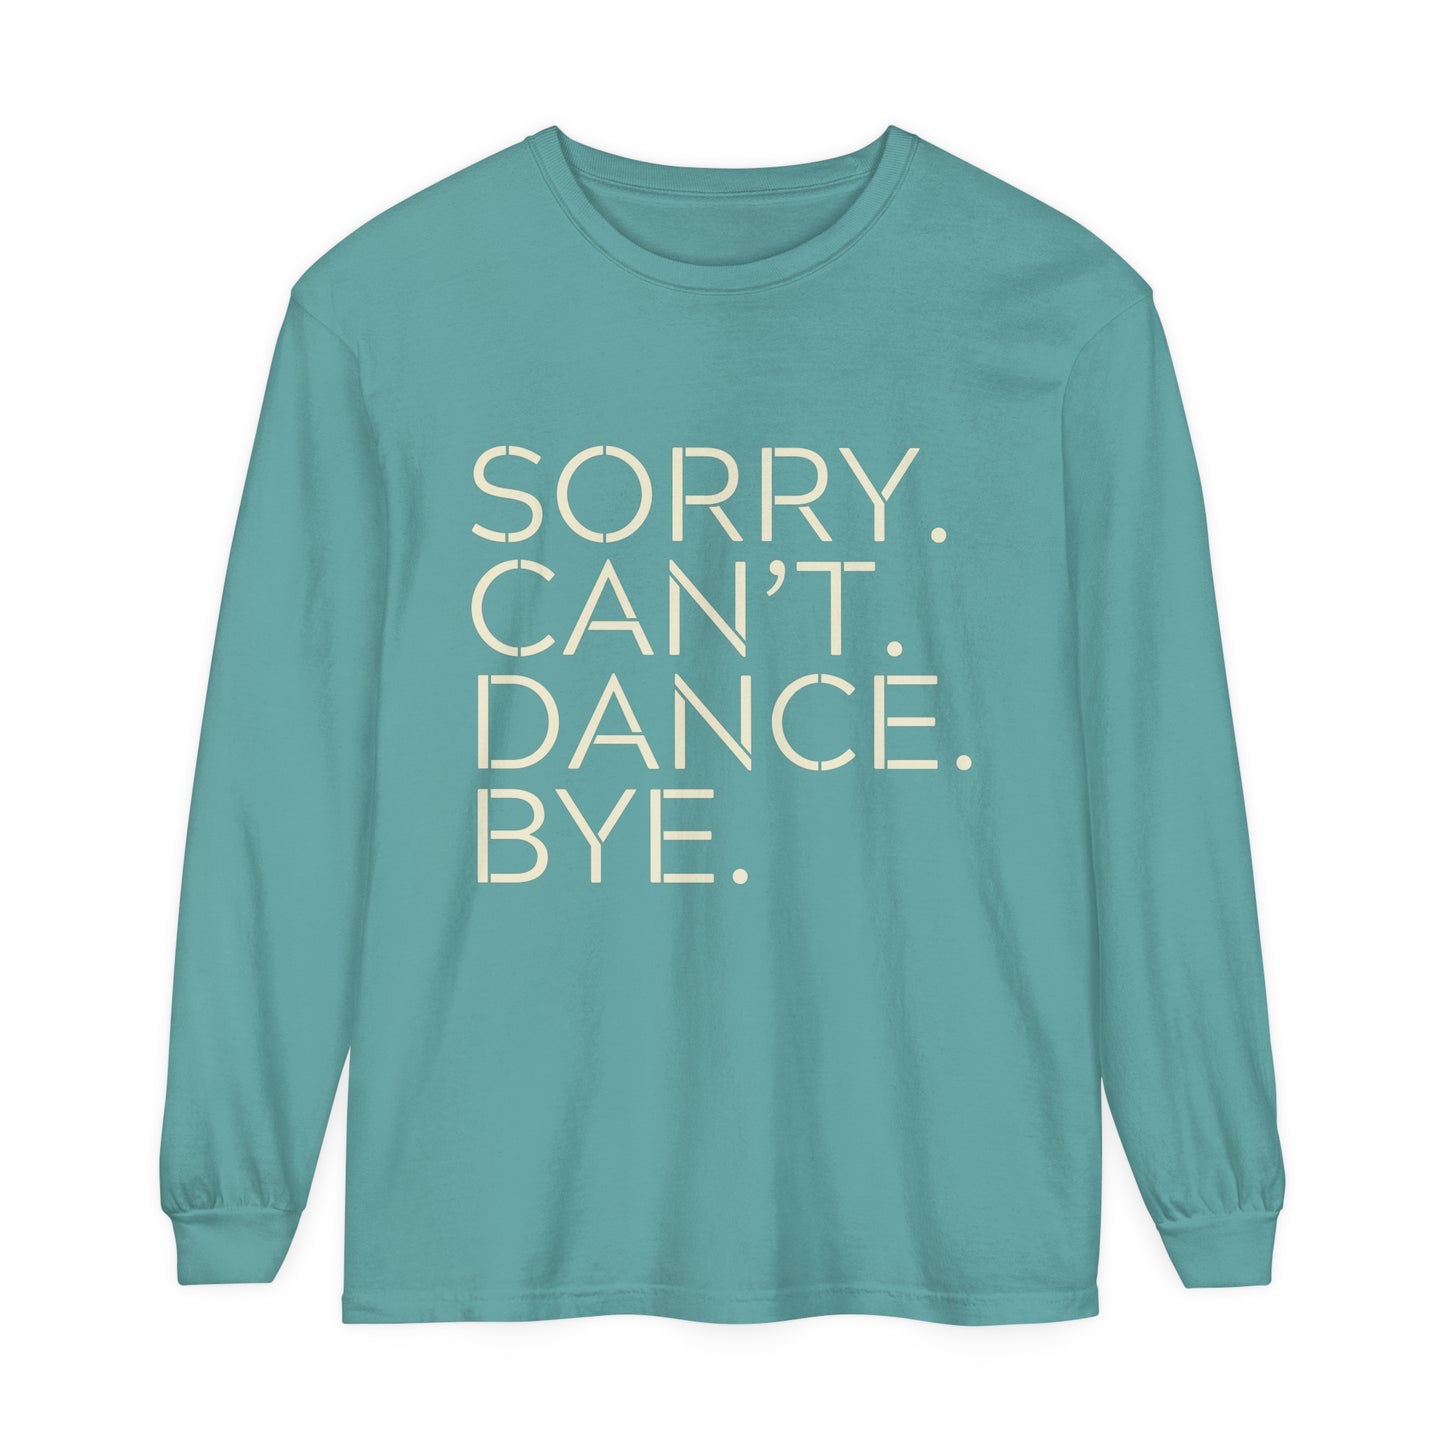 Sorry. Can't. Dance. Bye. Style 1 Women's Loose Long Sleeve T-Shirt